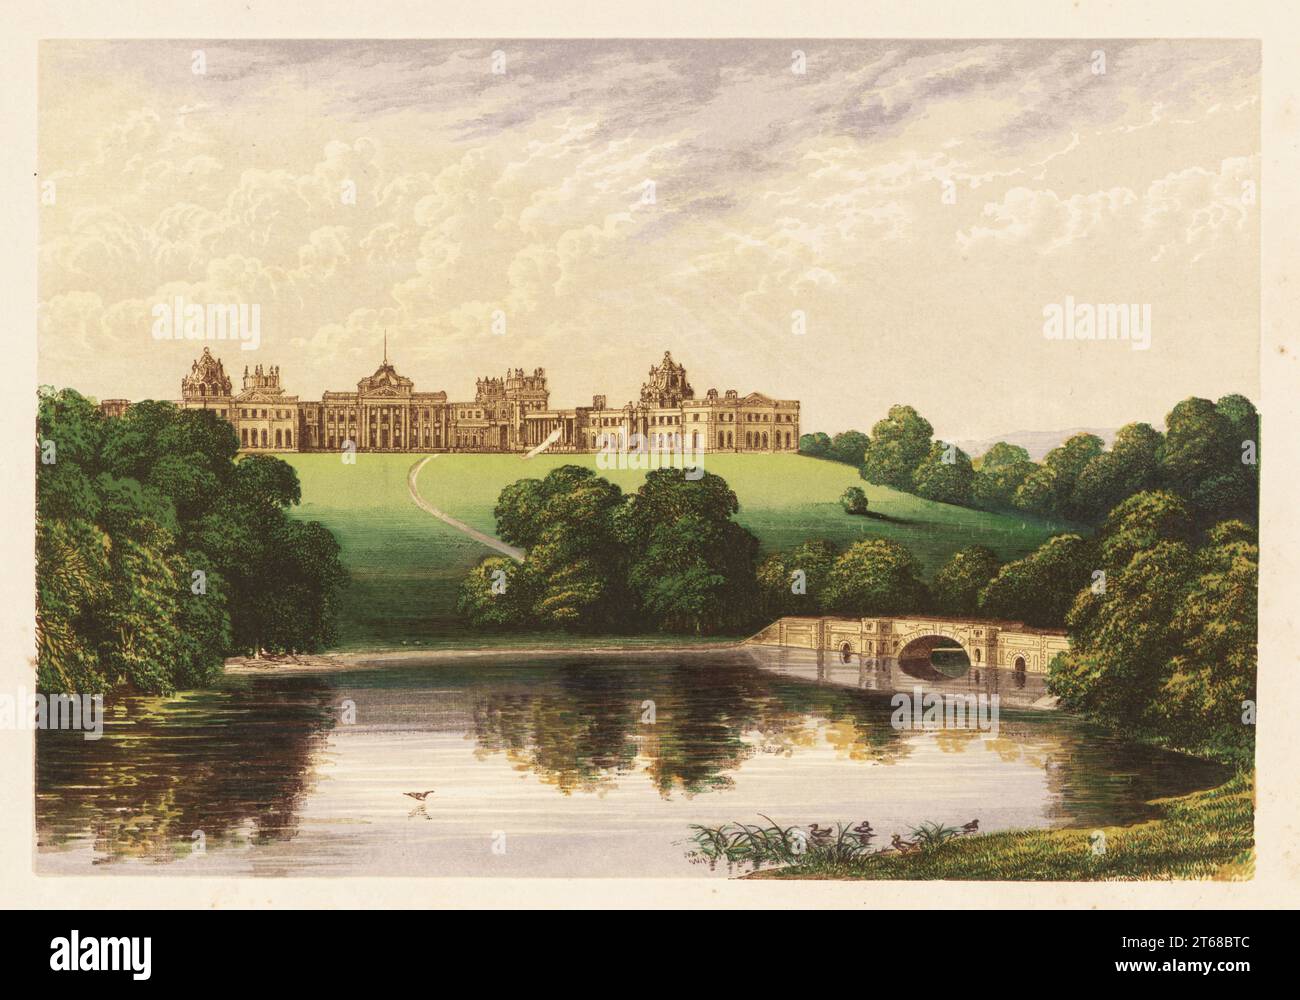 Blenheim Palace, Oxfordshire, England. English Baroque-style palace built by Sir John Vanbrugh for John Churchill, 1st Duke of Marlborough in the early 18th century. Colour woodblock by Benjamin Fawcett in the Baxter process of an illustration by Alexander Francis Lydon from Reverend Francis Orpen Morriss Picturesque Views of the Seats of Noblemen and Gentlemen of Great Britain and Ireland, William Mackenzie, London, 1880. Stock Photo